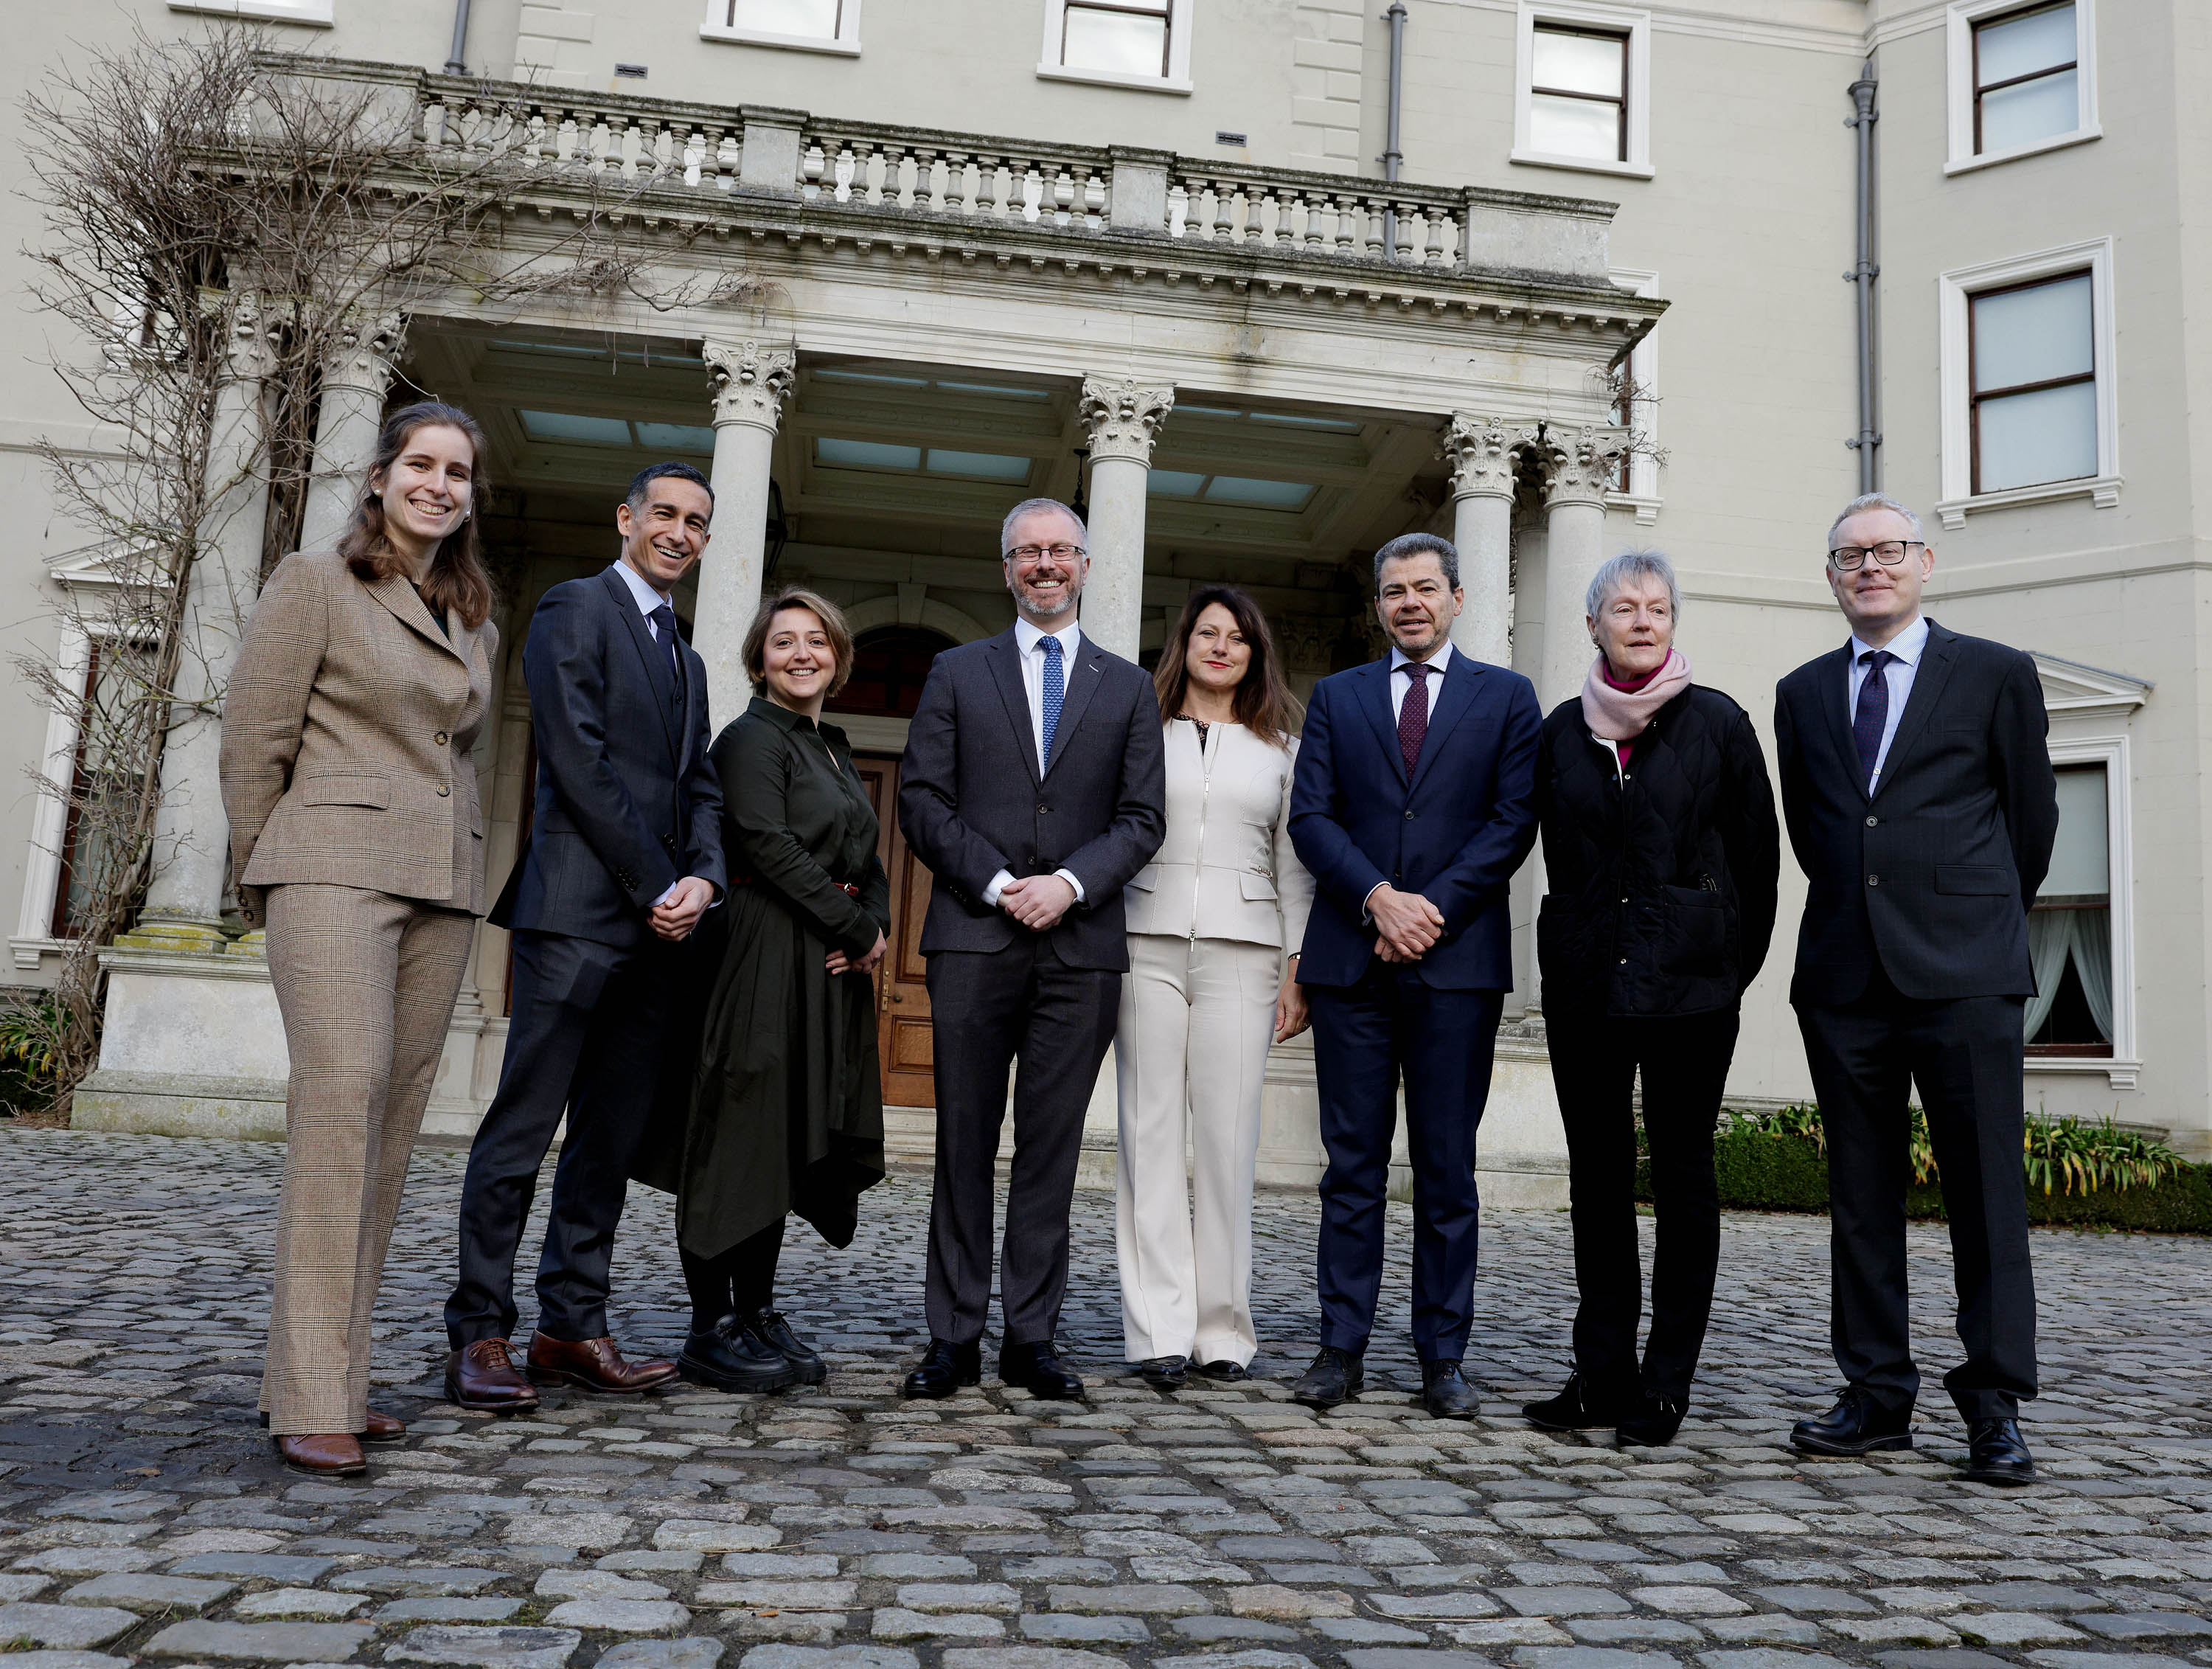 Joint Council of Europe - European Union Barnahus Ireland project kicks off in Dublin